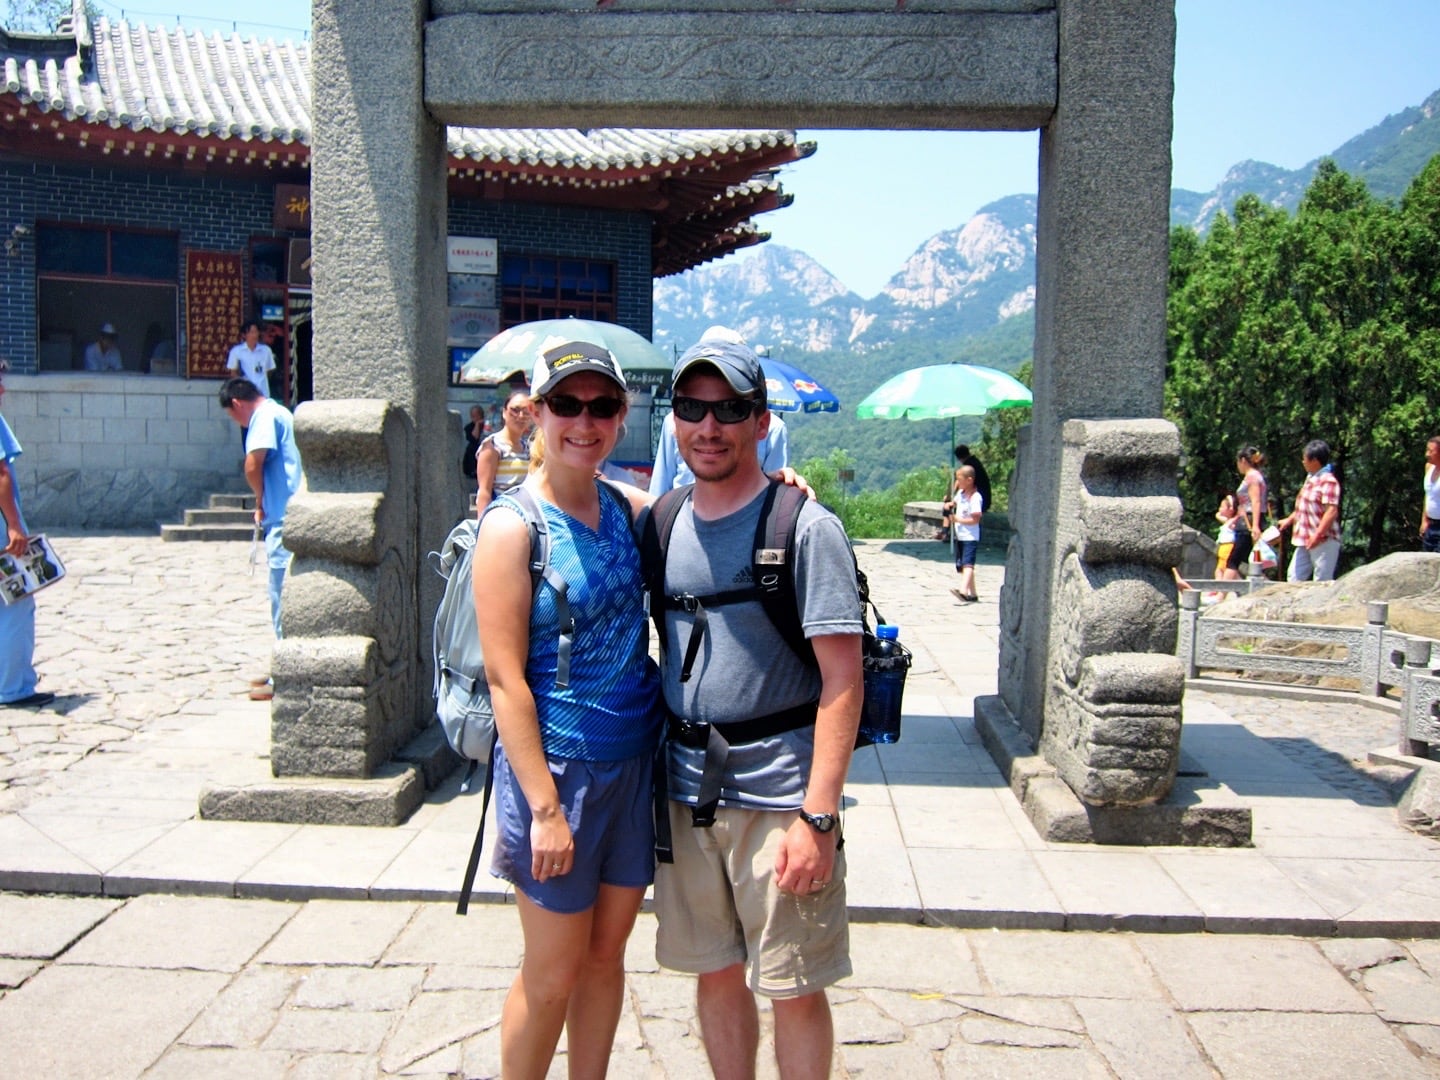 Two people standing in front of an archway